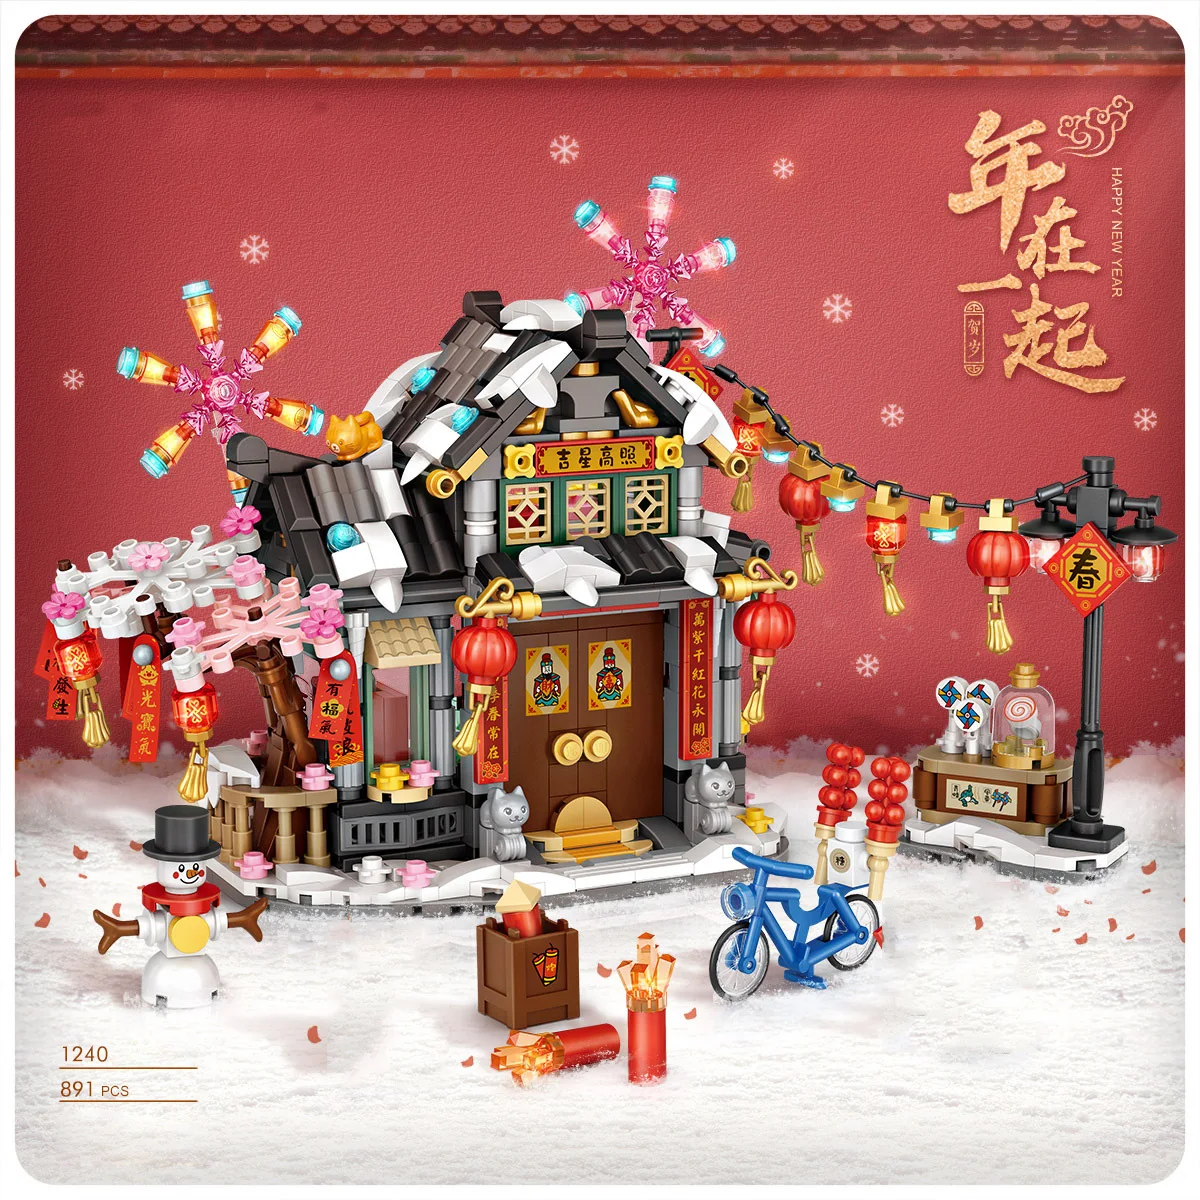 Street view house mini block china new year cottage building bricks figures streetscape thumb200